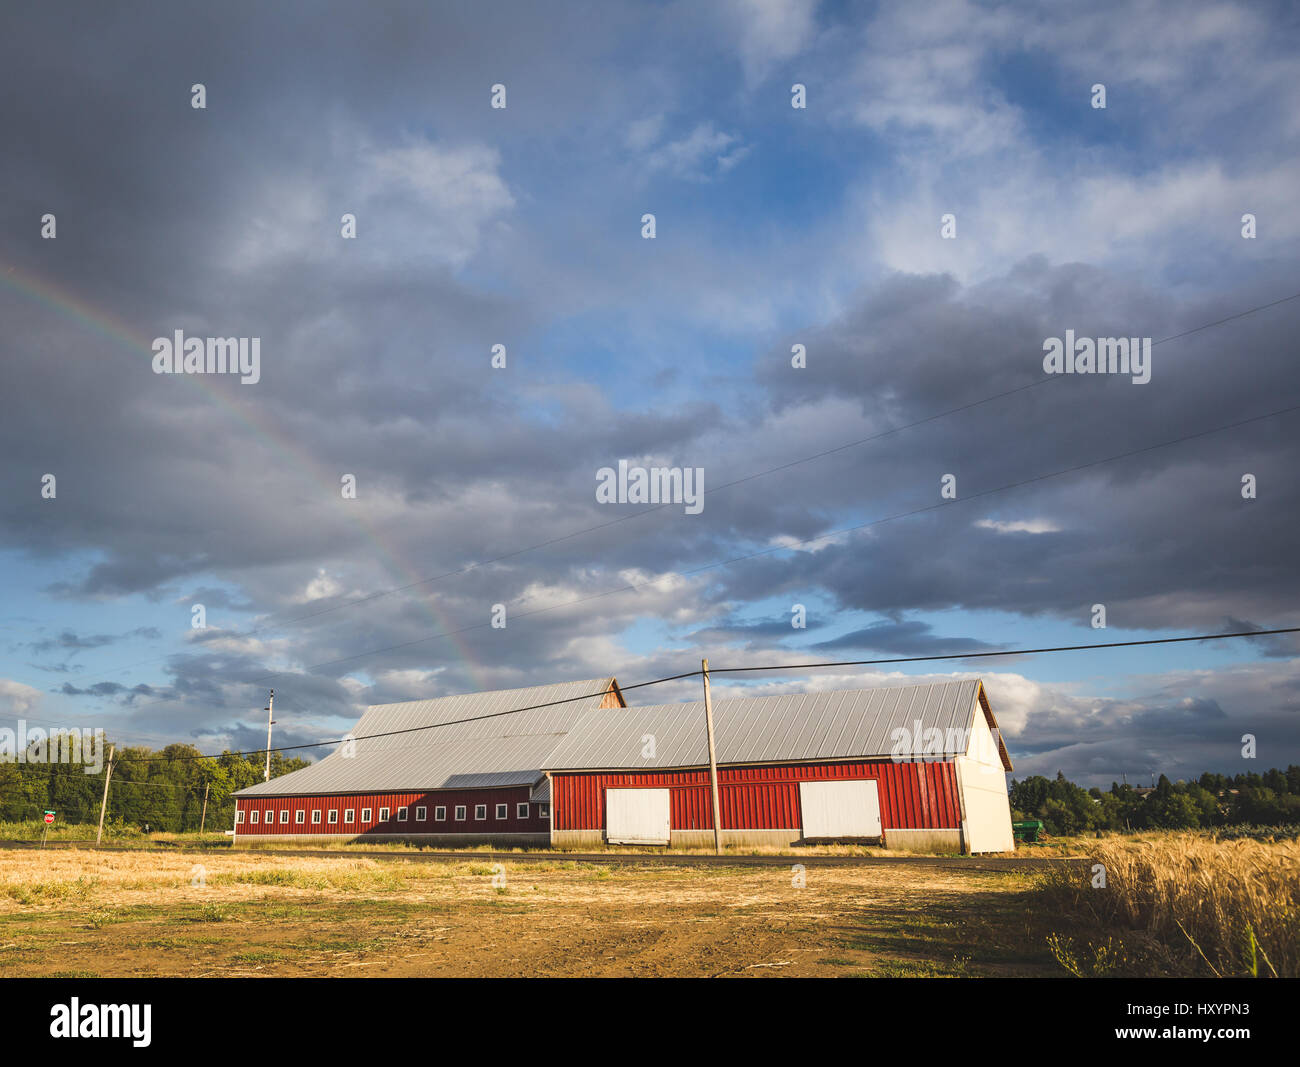 Red barn building with modern design and red walls under cloudy skies with a rainbow. Oregon, USA. Stock Photo